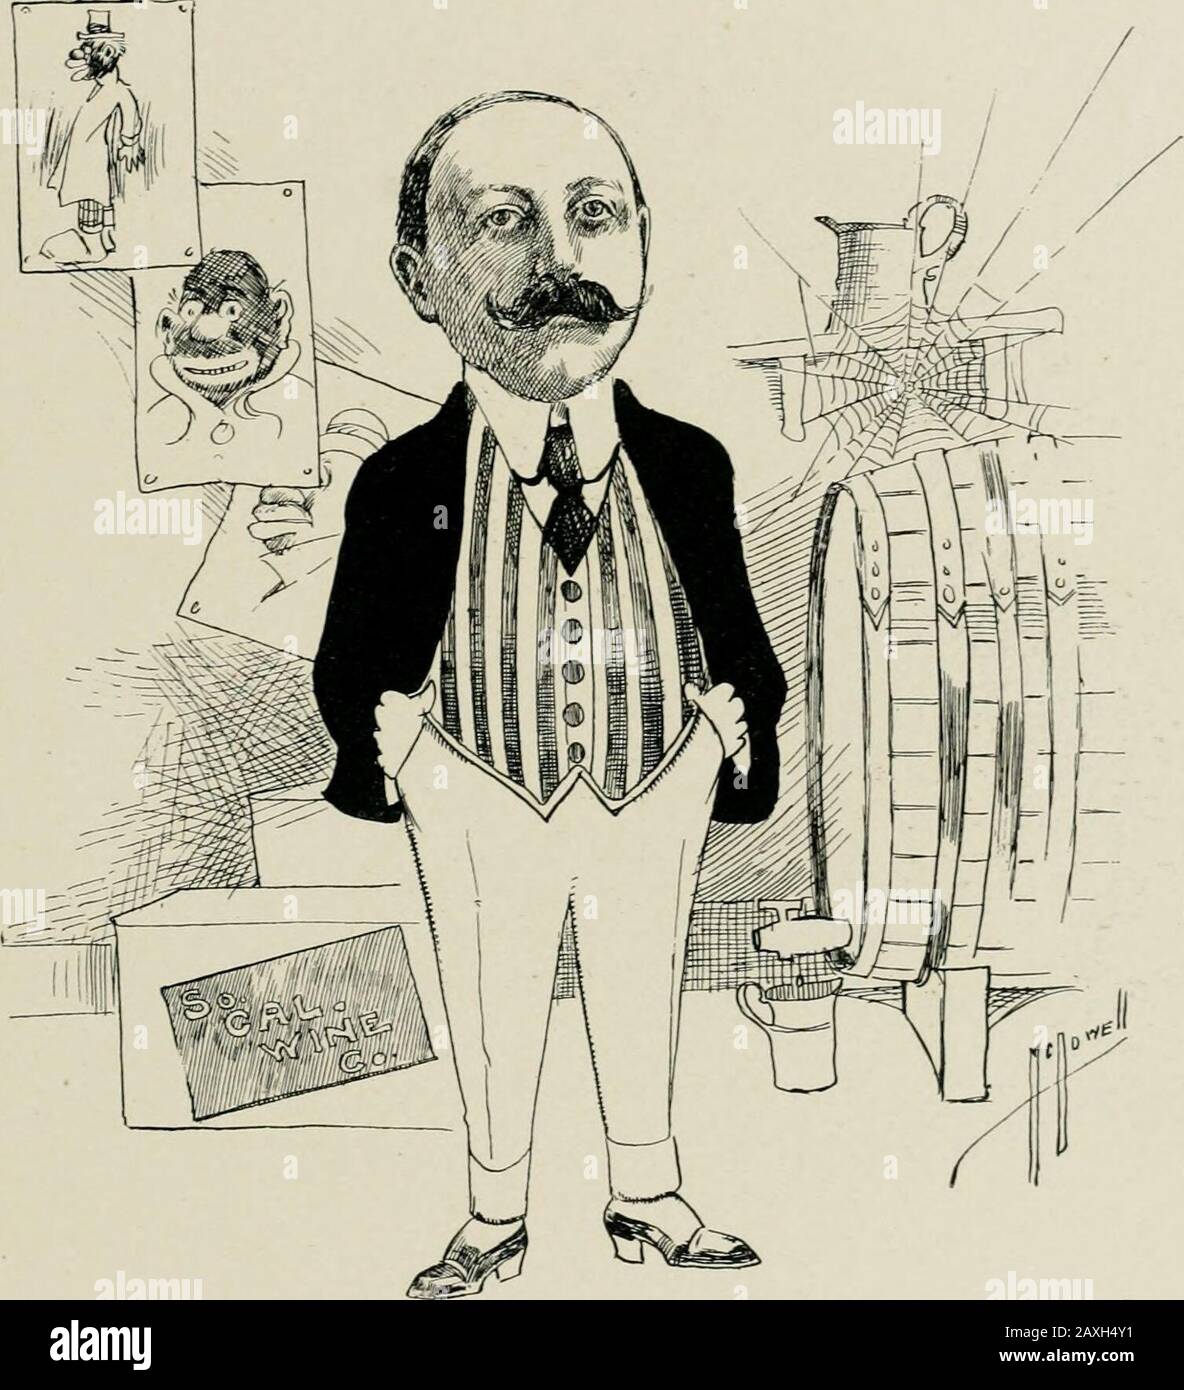 'As we see 'em,' a volume of cartoons and caricatures of Los Angeles citizens . WILLARD L. GOODWIN.Secretary City Ccjuiicil.. HUGO GOLDSCH.MIDT.Southern California Wine Co Stock Photo